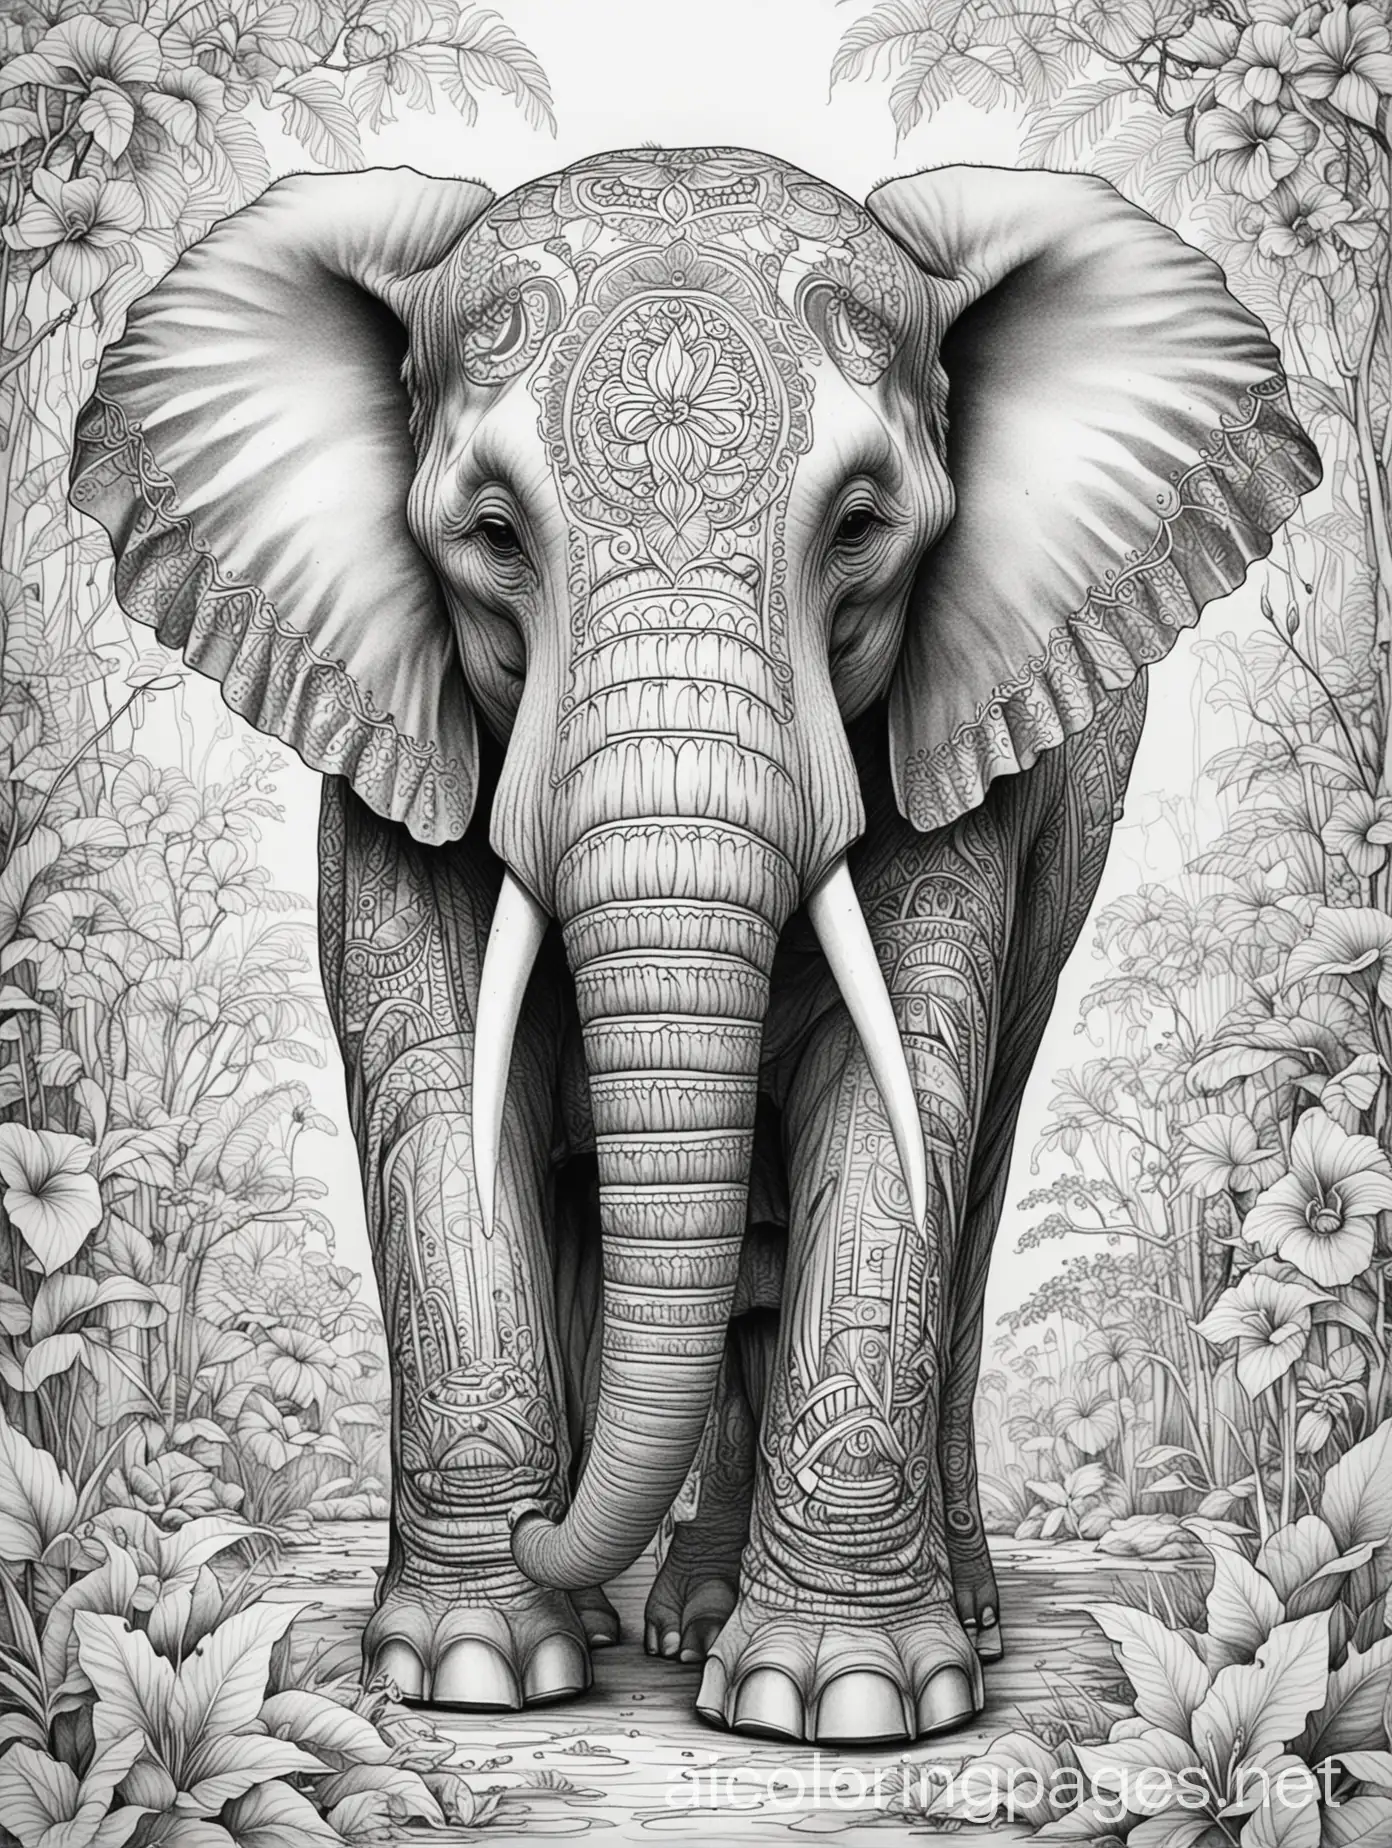 line work, coloring book, majestic elephants, jungle fantasy, intricate, complex, no shading, zen, black and white, thick outlines, white background, black ink tattoo design, Coloring Page, black and white, line art, white background, Simplicity, Ample White Space. The background of the coloring page is plain white to make it easy for young children to color within the lines. The outlines of all the subjects are easy to distinguish, making it simple for kids to color without too much difficulty